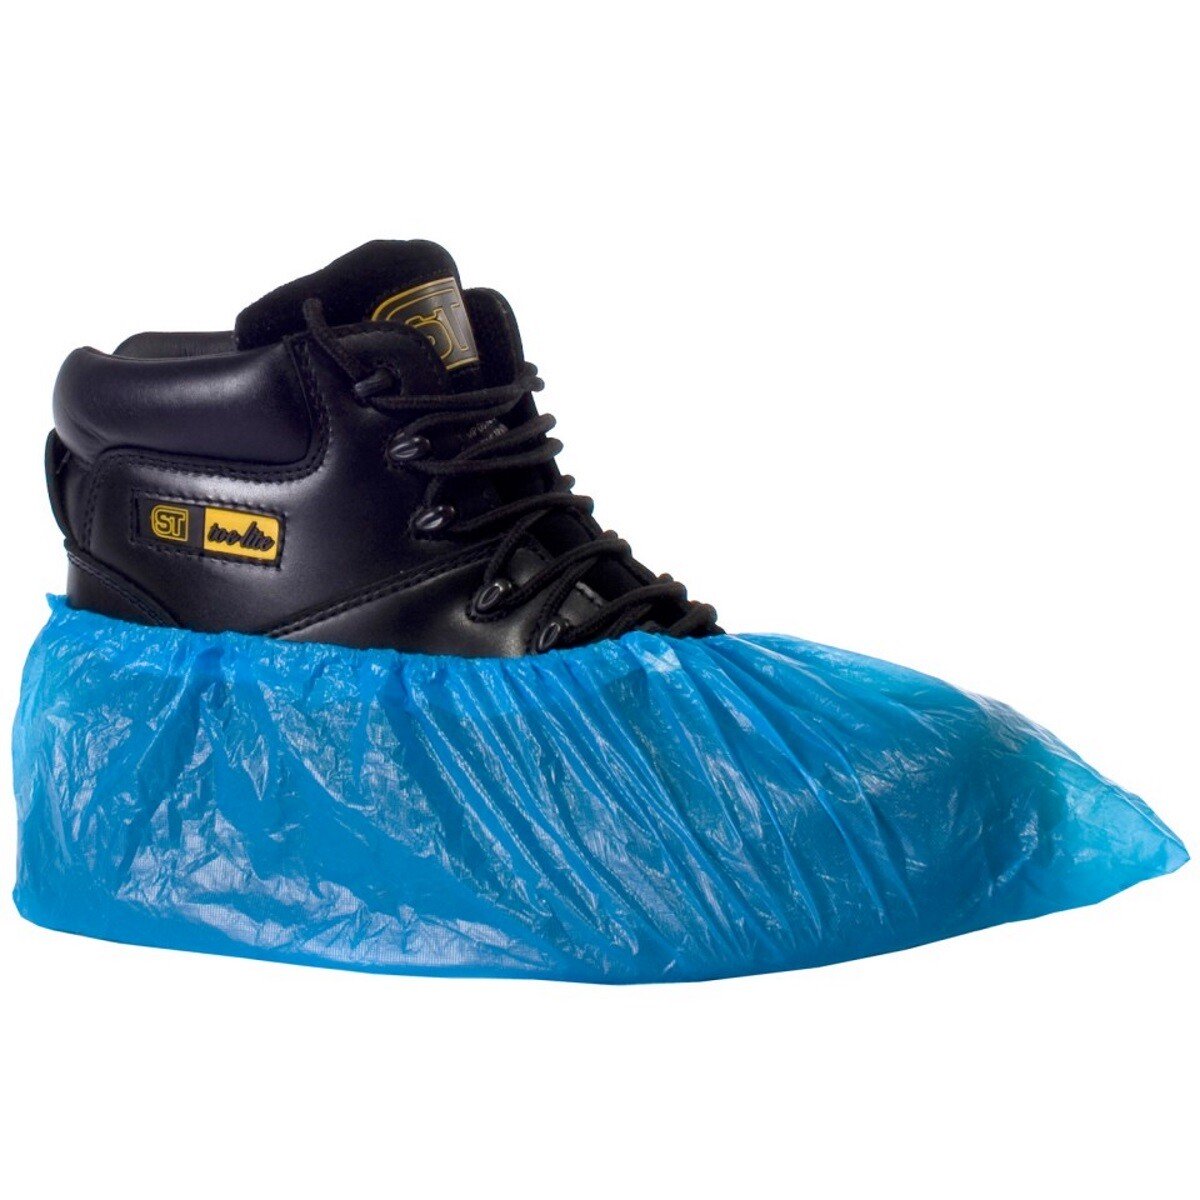 disposable overshoe covers